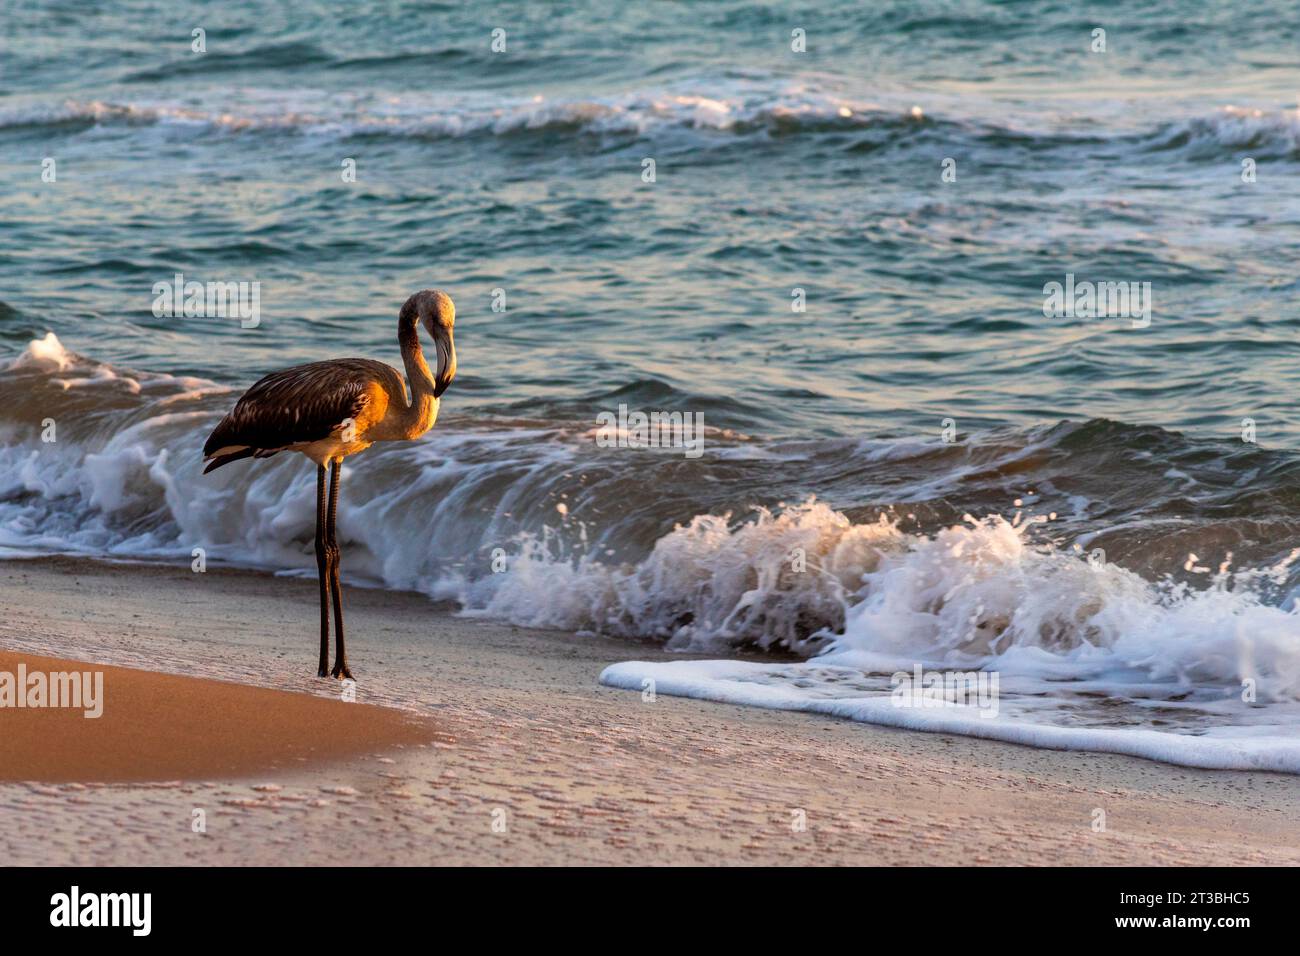 Pink and black flamingo inside the blue sea at sunset light Stock Photo